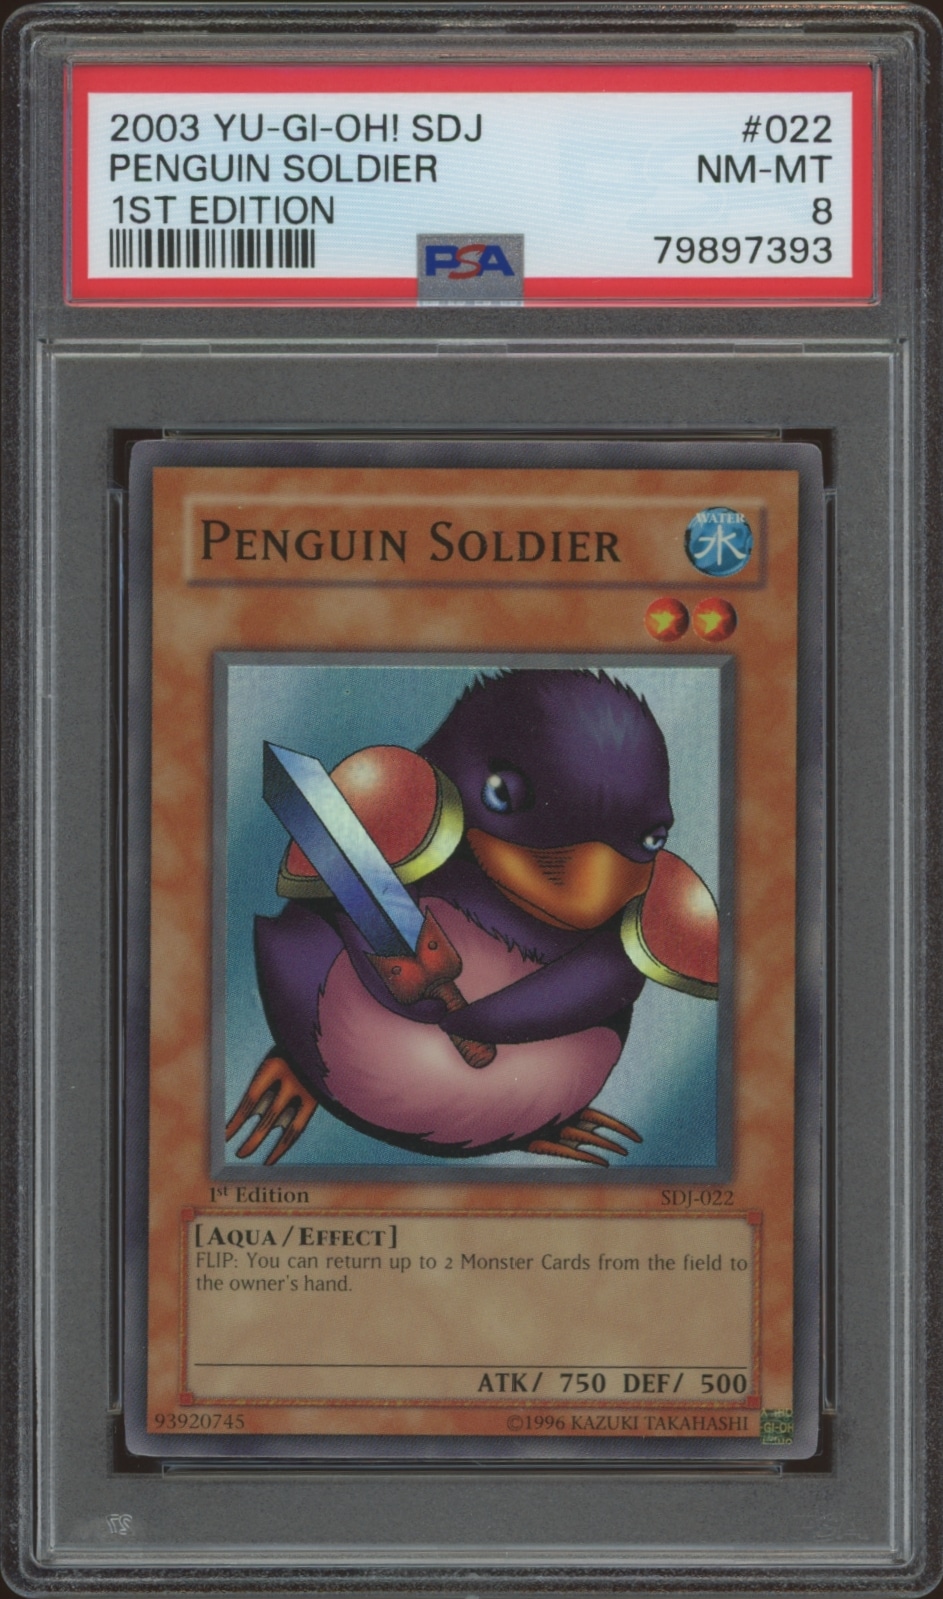 PSA-graded Yu-Gi-Oh! Penguin Soldier trading card from 2003 Joey Starter Deck.